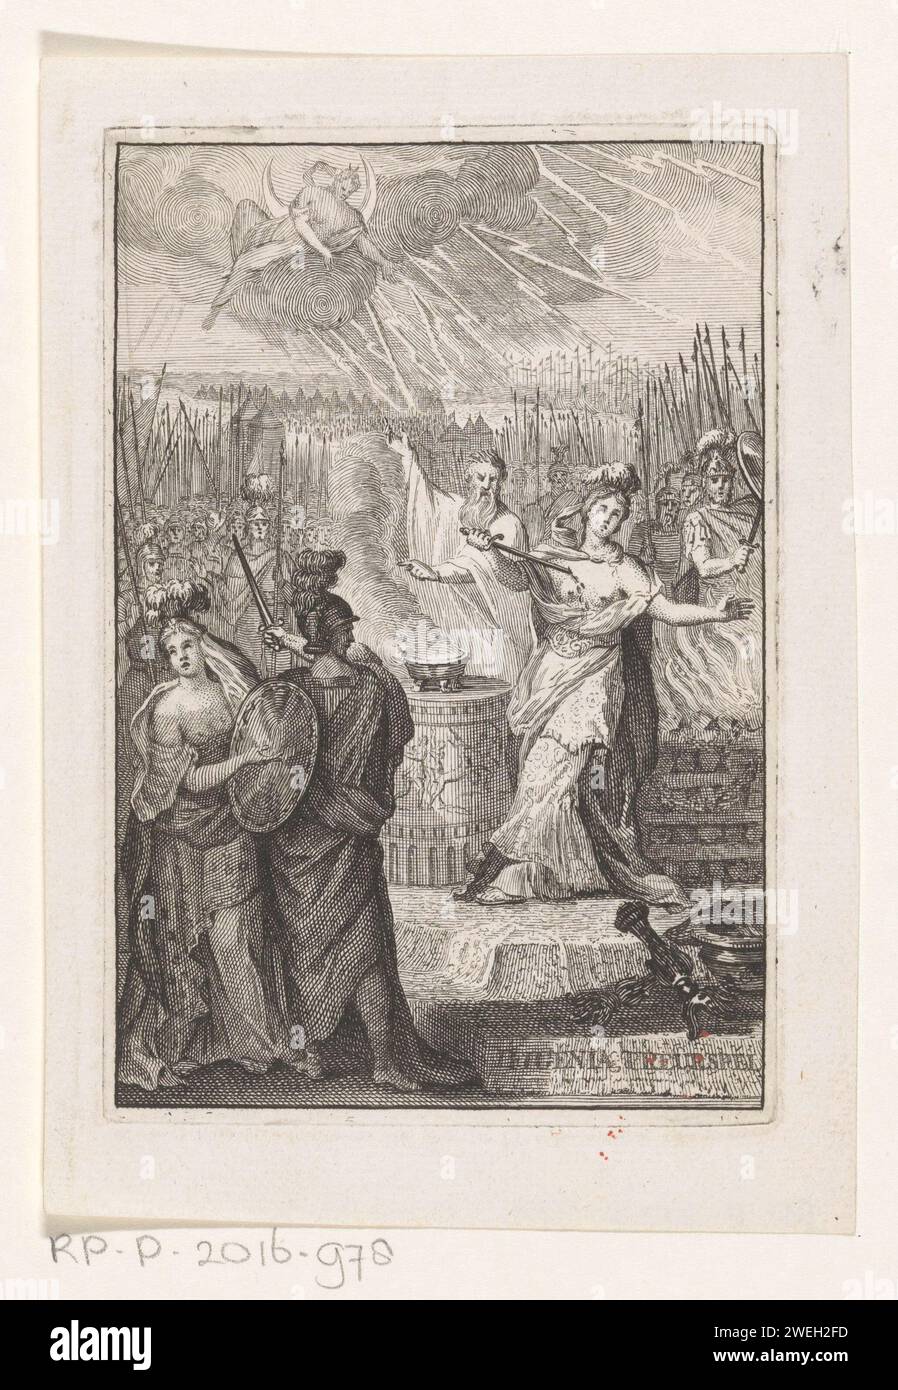 Offer van Iphigenia, anonymous, 1715 print The high priest Kalchas is about to sacrifice Ihpigenia to Diana. Iphigenia stands next to him and puts a sword in her chest. Soldiers and spectators are all around. Diana looks sitting on a thunder cloud.  paper etching the sacrifice of Iphigenia Stock Photo